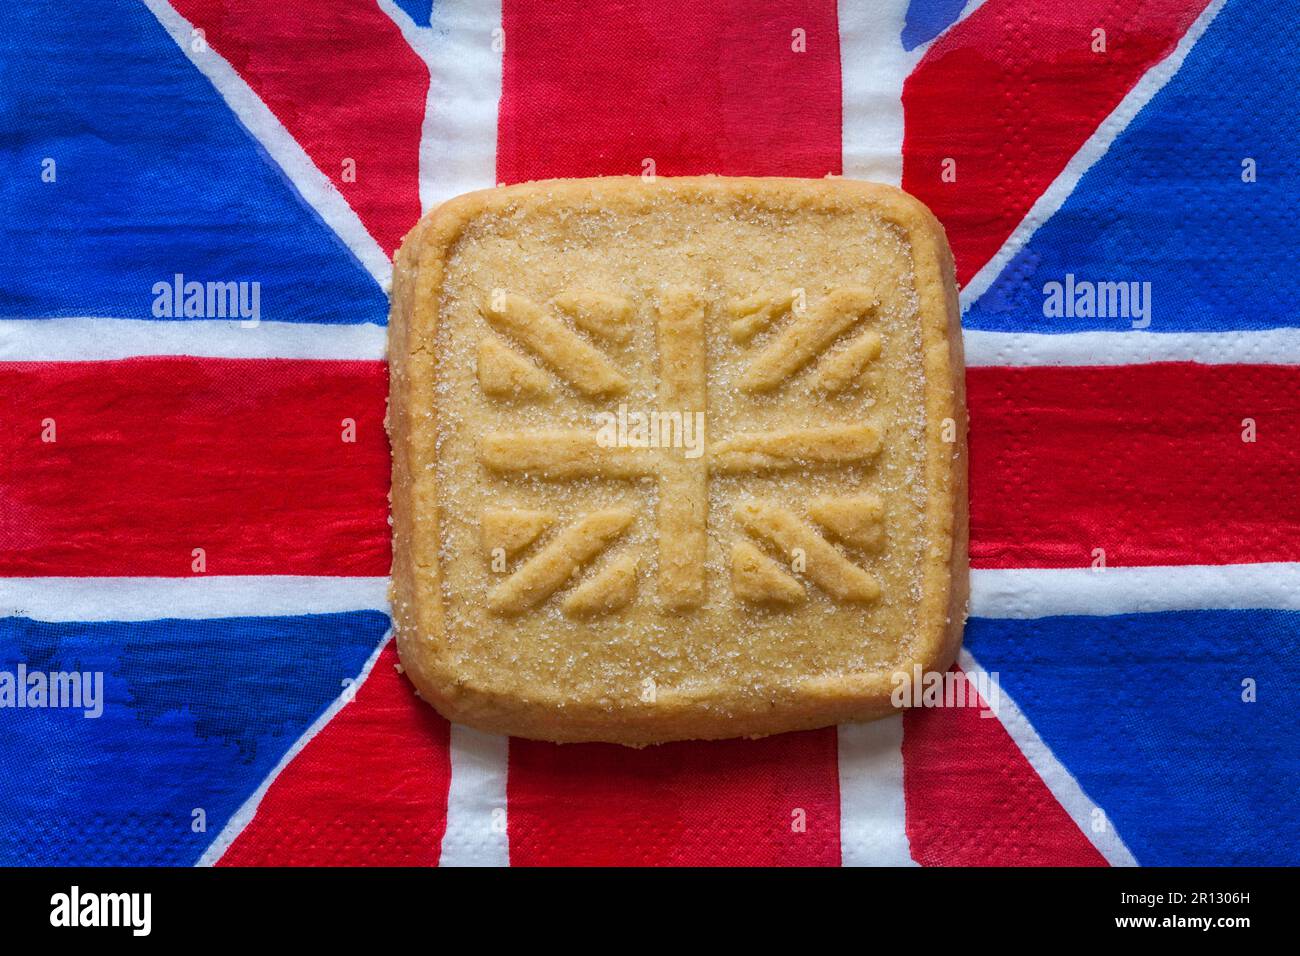 all butter shortbread biscuit to commemorate The Coronation of HM King Charles III 2023 from M&S on Union Jack napkin serviette Stock Photo